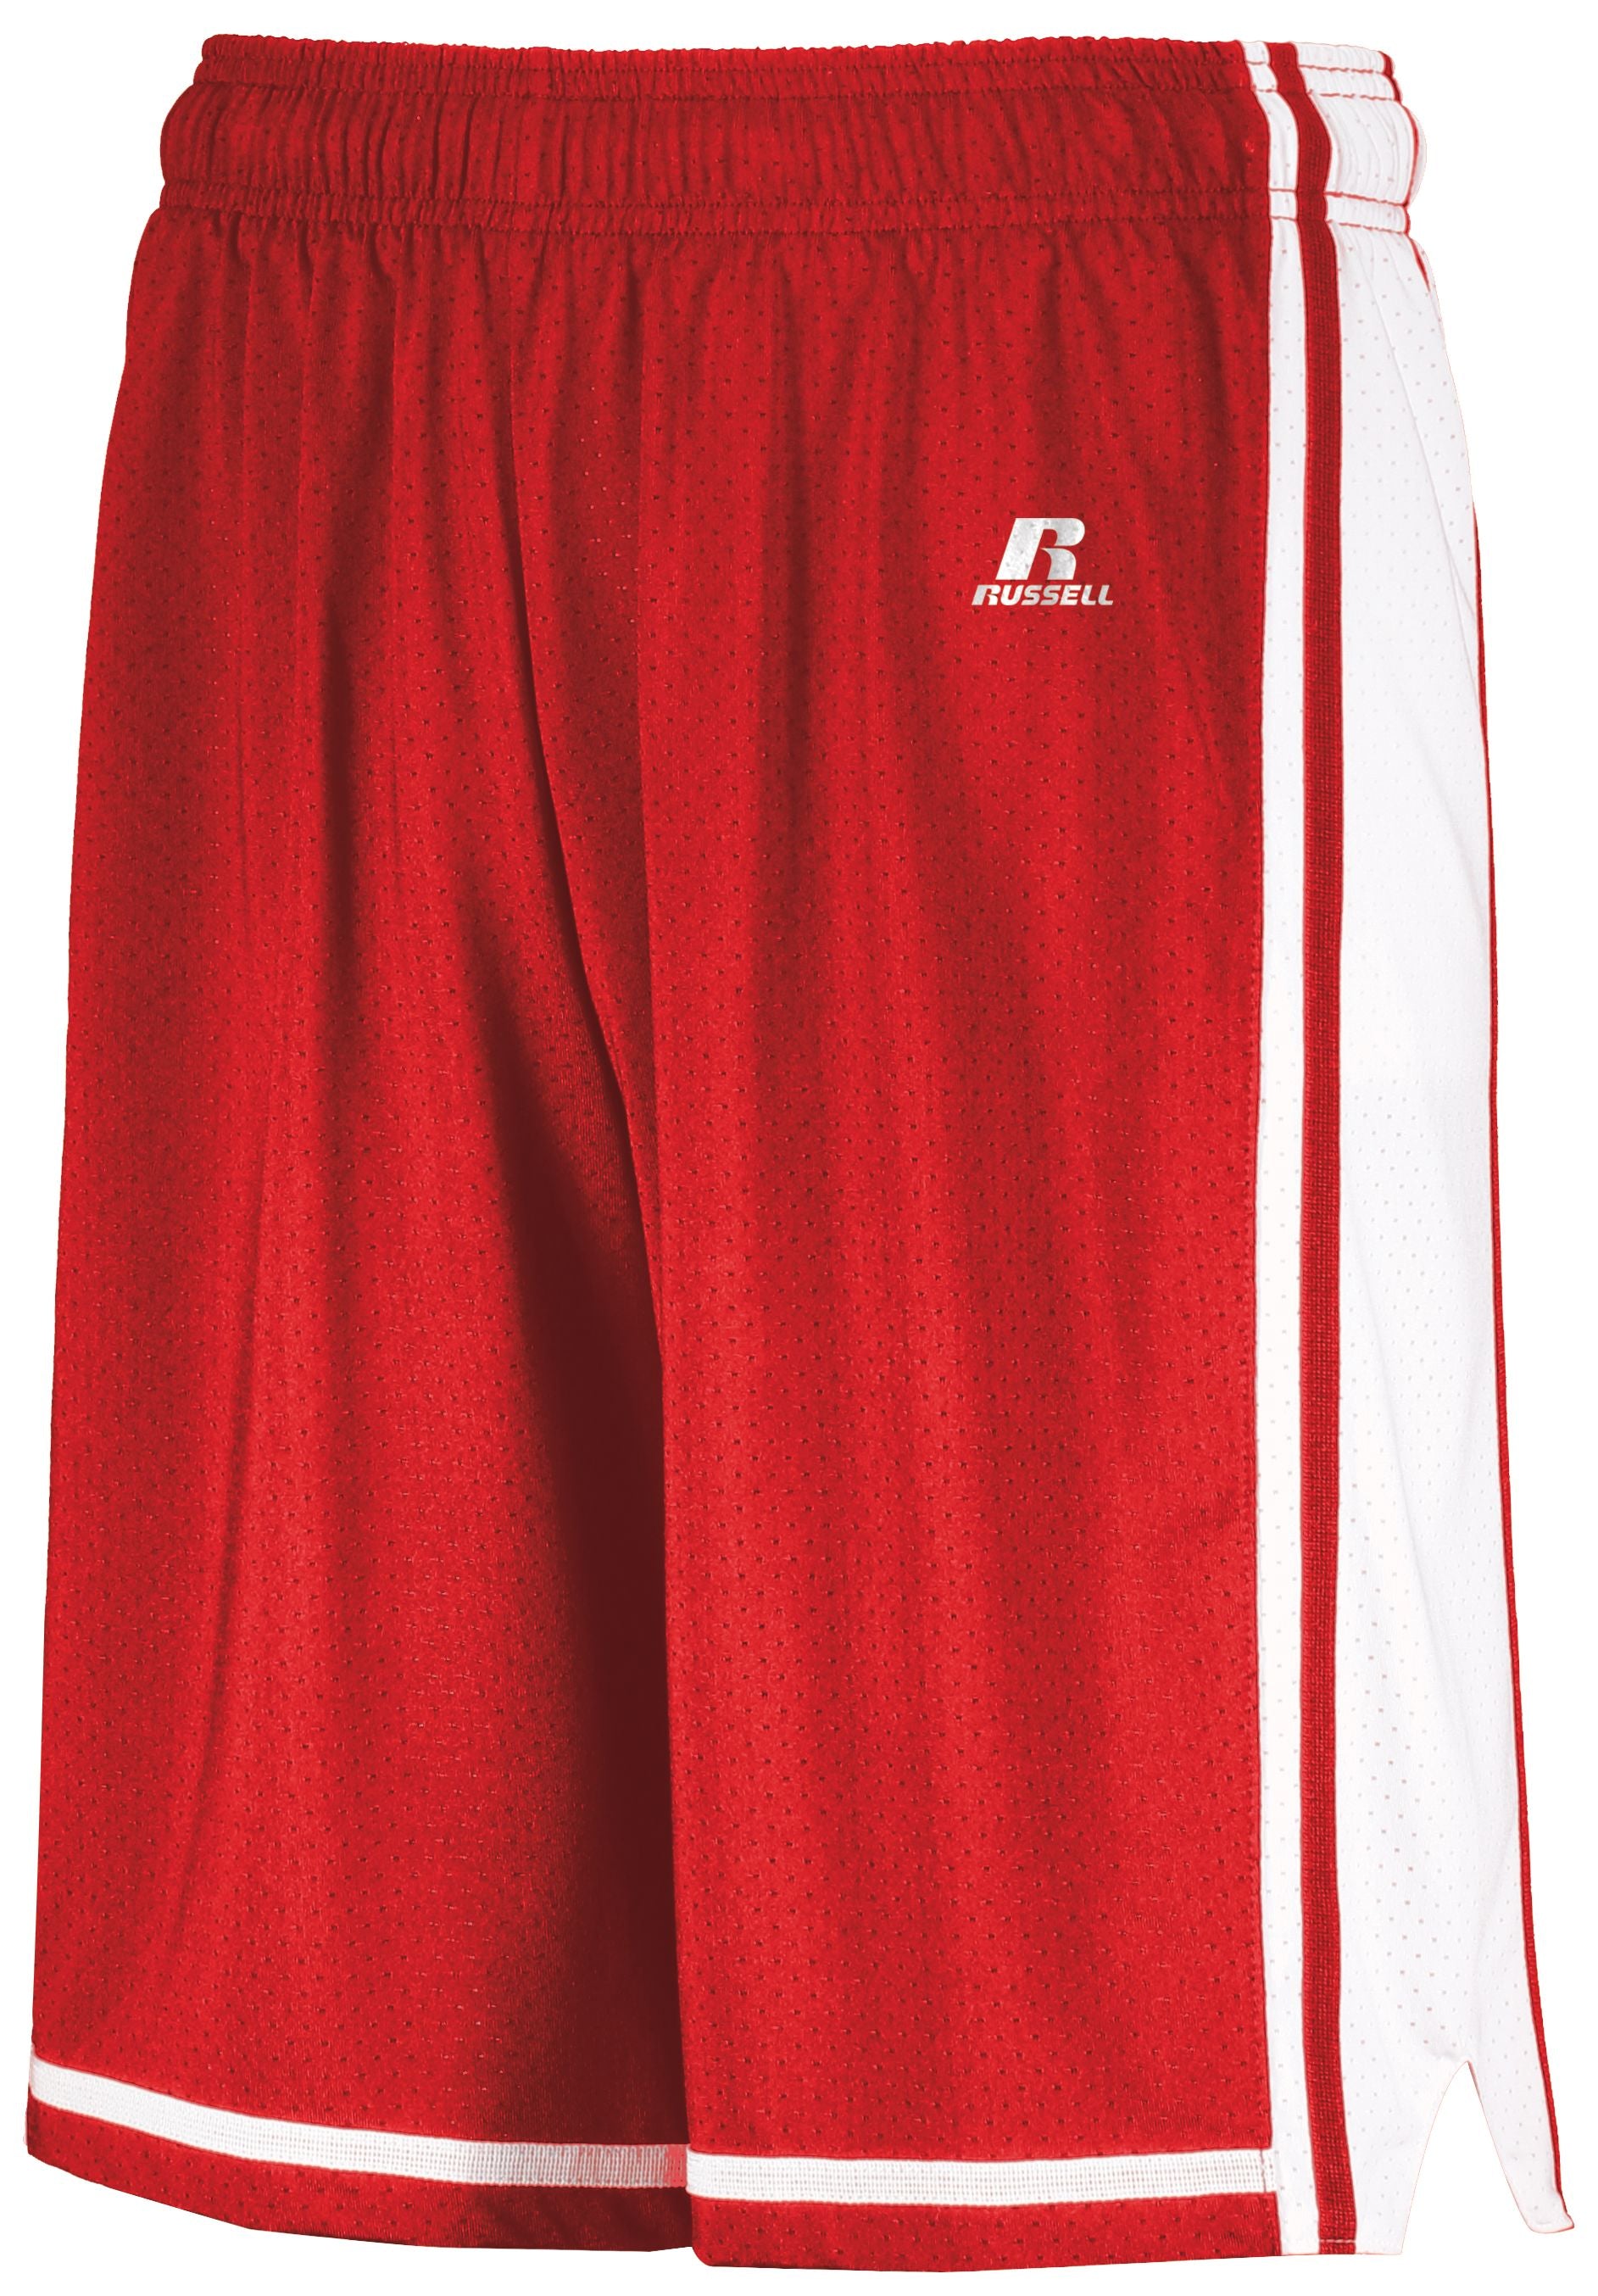 Russell Athletic Legacy Basketball Shorts in True Red/White  -Part of the Adult, Adult-Shorts, Basketball, Russell-Athletic-Products, All-Sports, All-Sports-1 product lines at KanaleyCreations.com